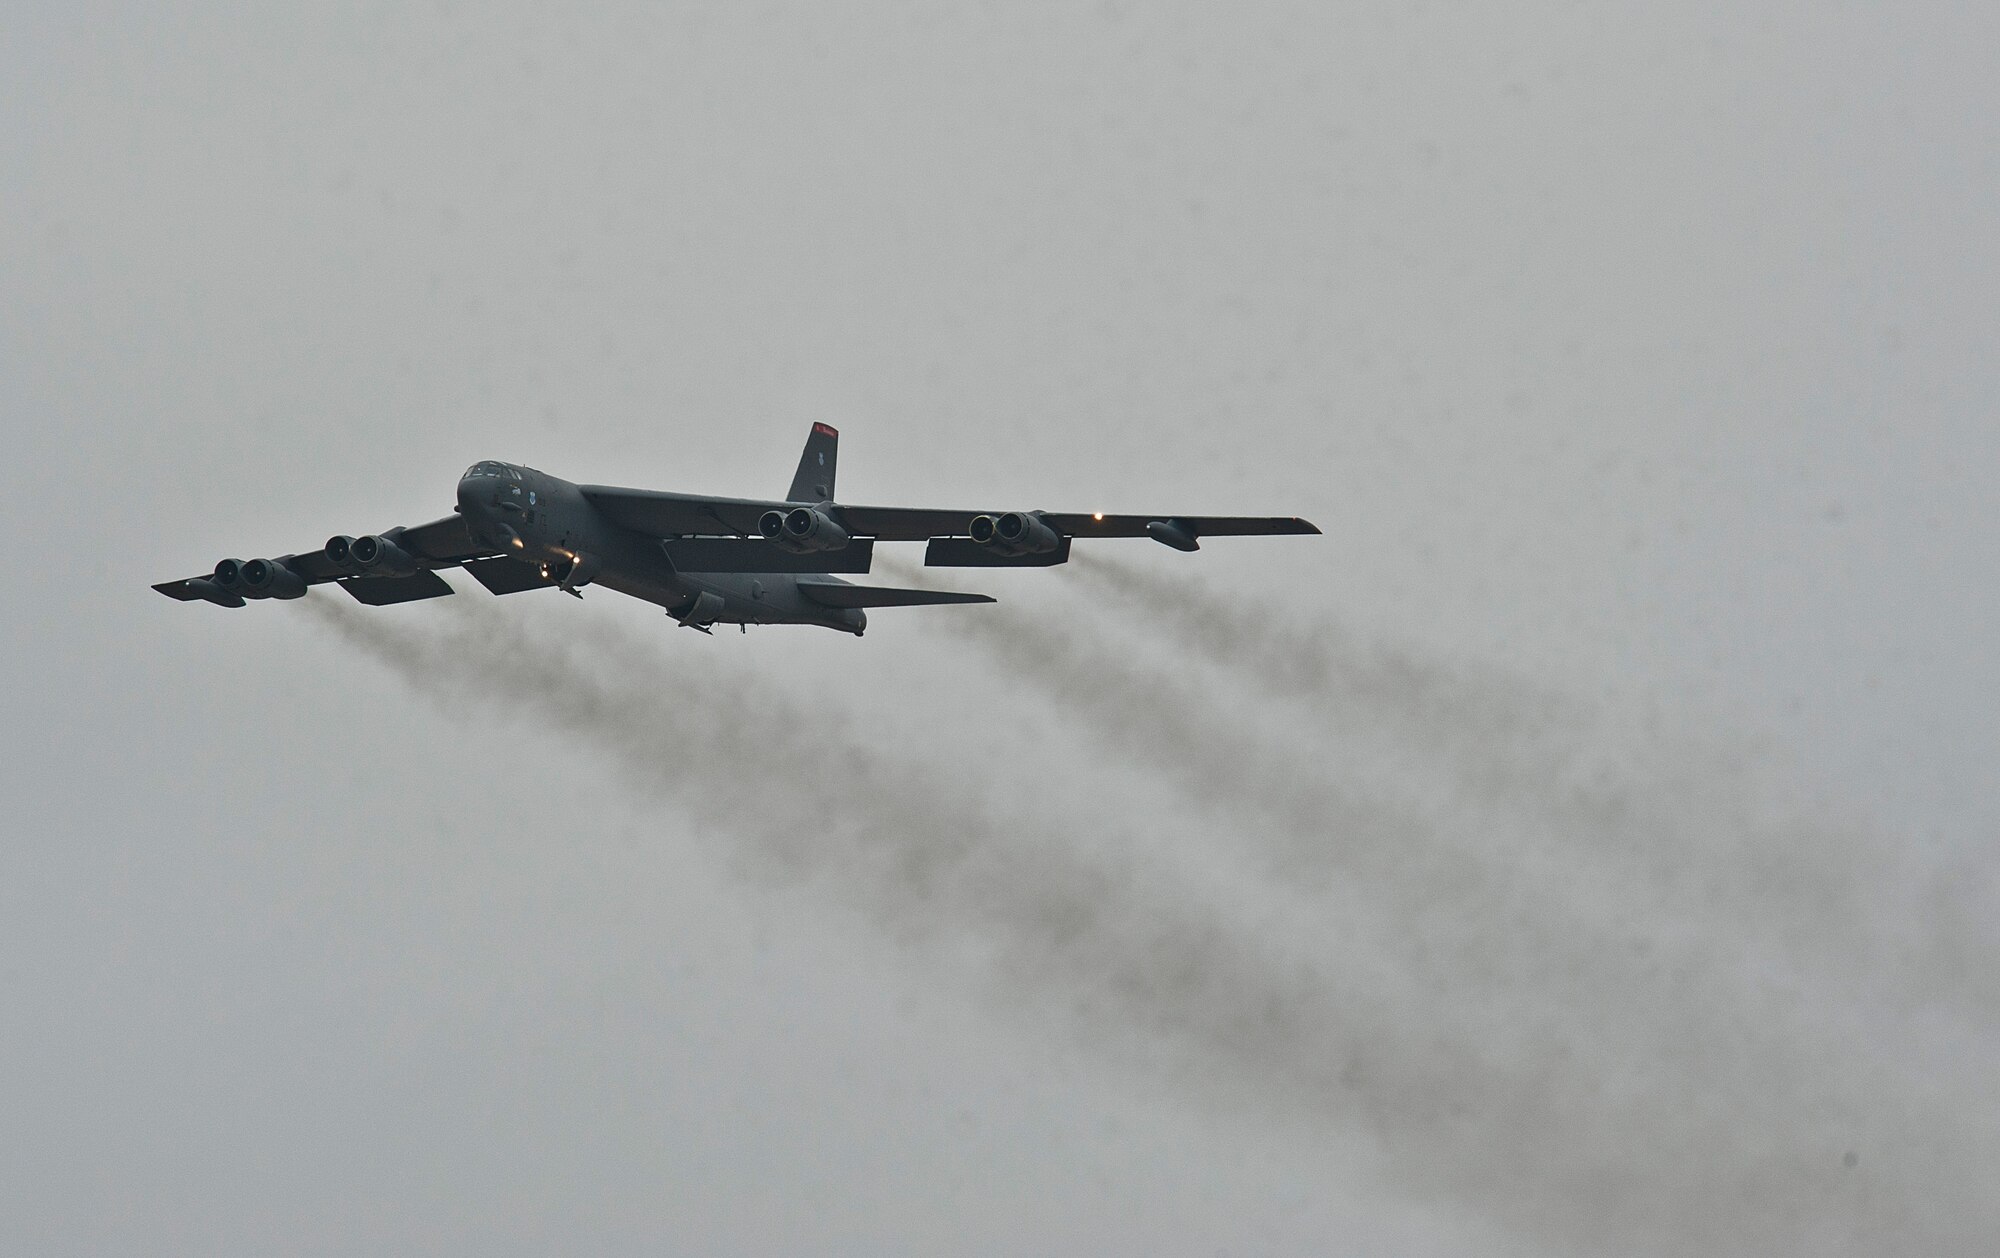 A B-52H Stratofortress assigned to Air Force Global Strike Command (AFGSC) flies over Minot Air Force Base, N.D., Oct. 30, 2016, during exercise Global Thunder 17. AFGSC supports U.S. Strategic Command's (USSTRATCOM) global strike and nuclear deterrence missions by providing strategic assets, including bombers like the B-52 and B-2, to ensure a safe, secure, effective and ready deterrent force. Global Thunder is an annual training event that assesses command and control functionality in all USSTRATCOM mission areas and affords component commands a venue to evaluate their joint operational readiness. (U.S. Air Force photo by Airman 1st Class Jonathan McElderry)